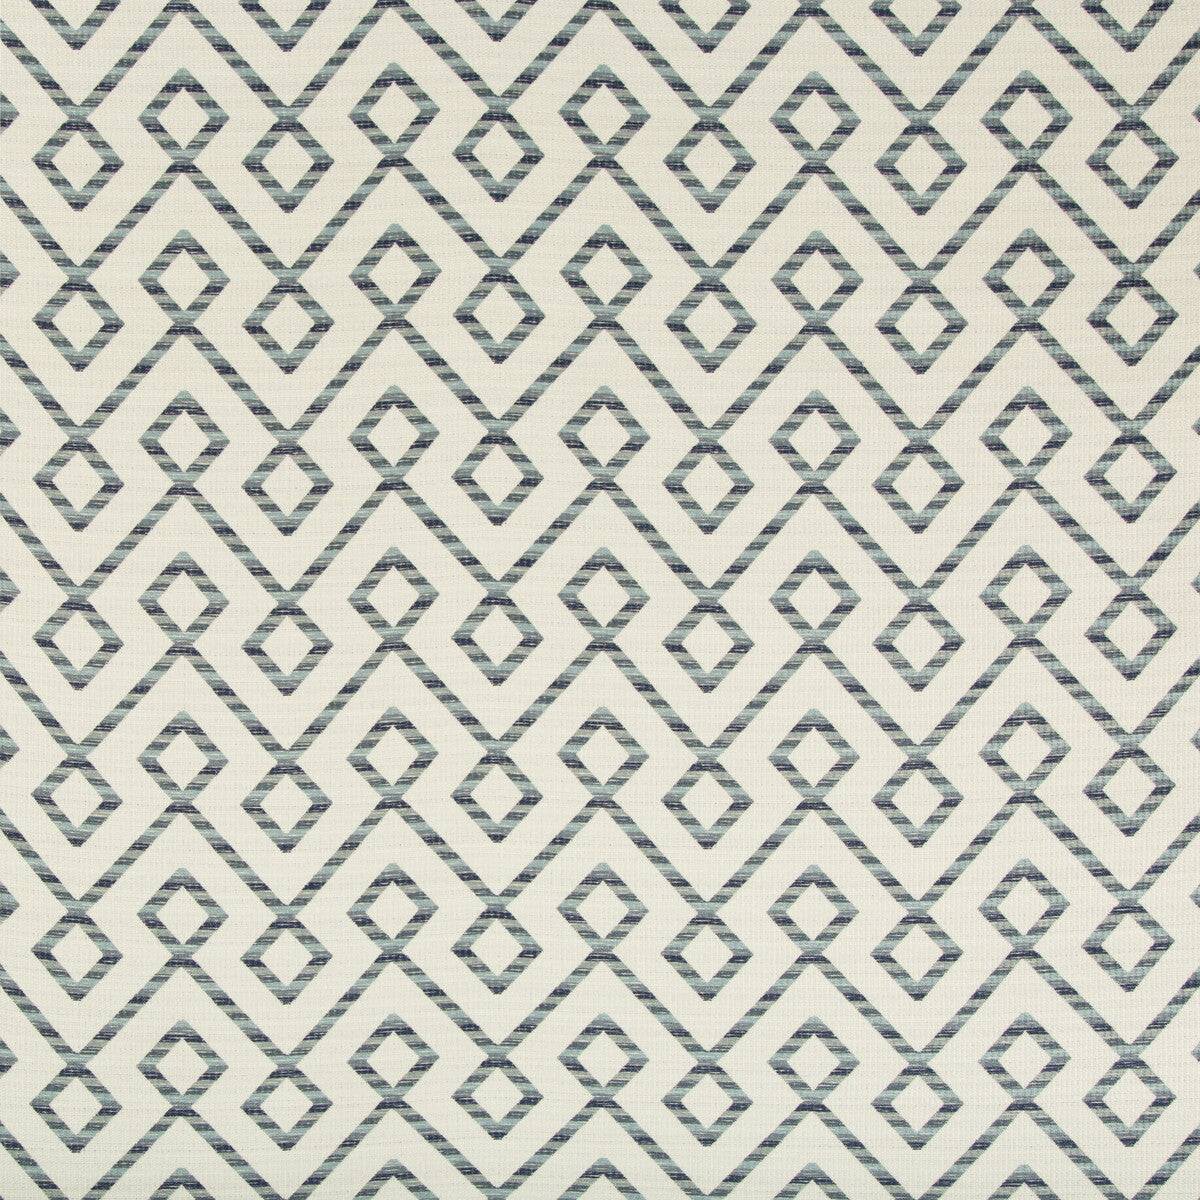 Kravet Design fabric in 34708-1615 color - pattern 34708.1615.0 - by Kravet Design in the Performance Crypton Home collection